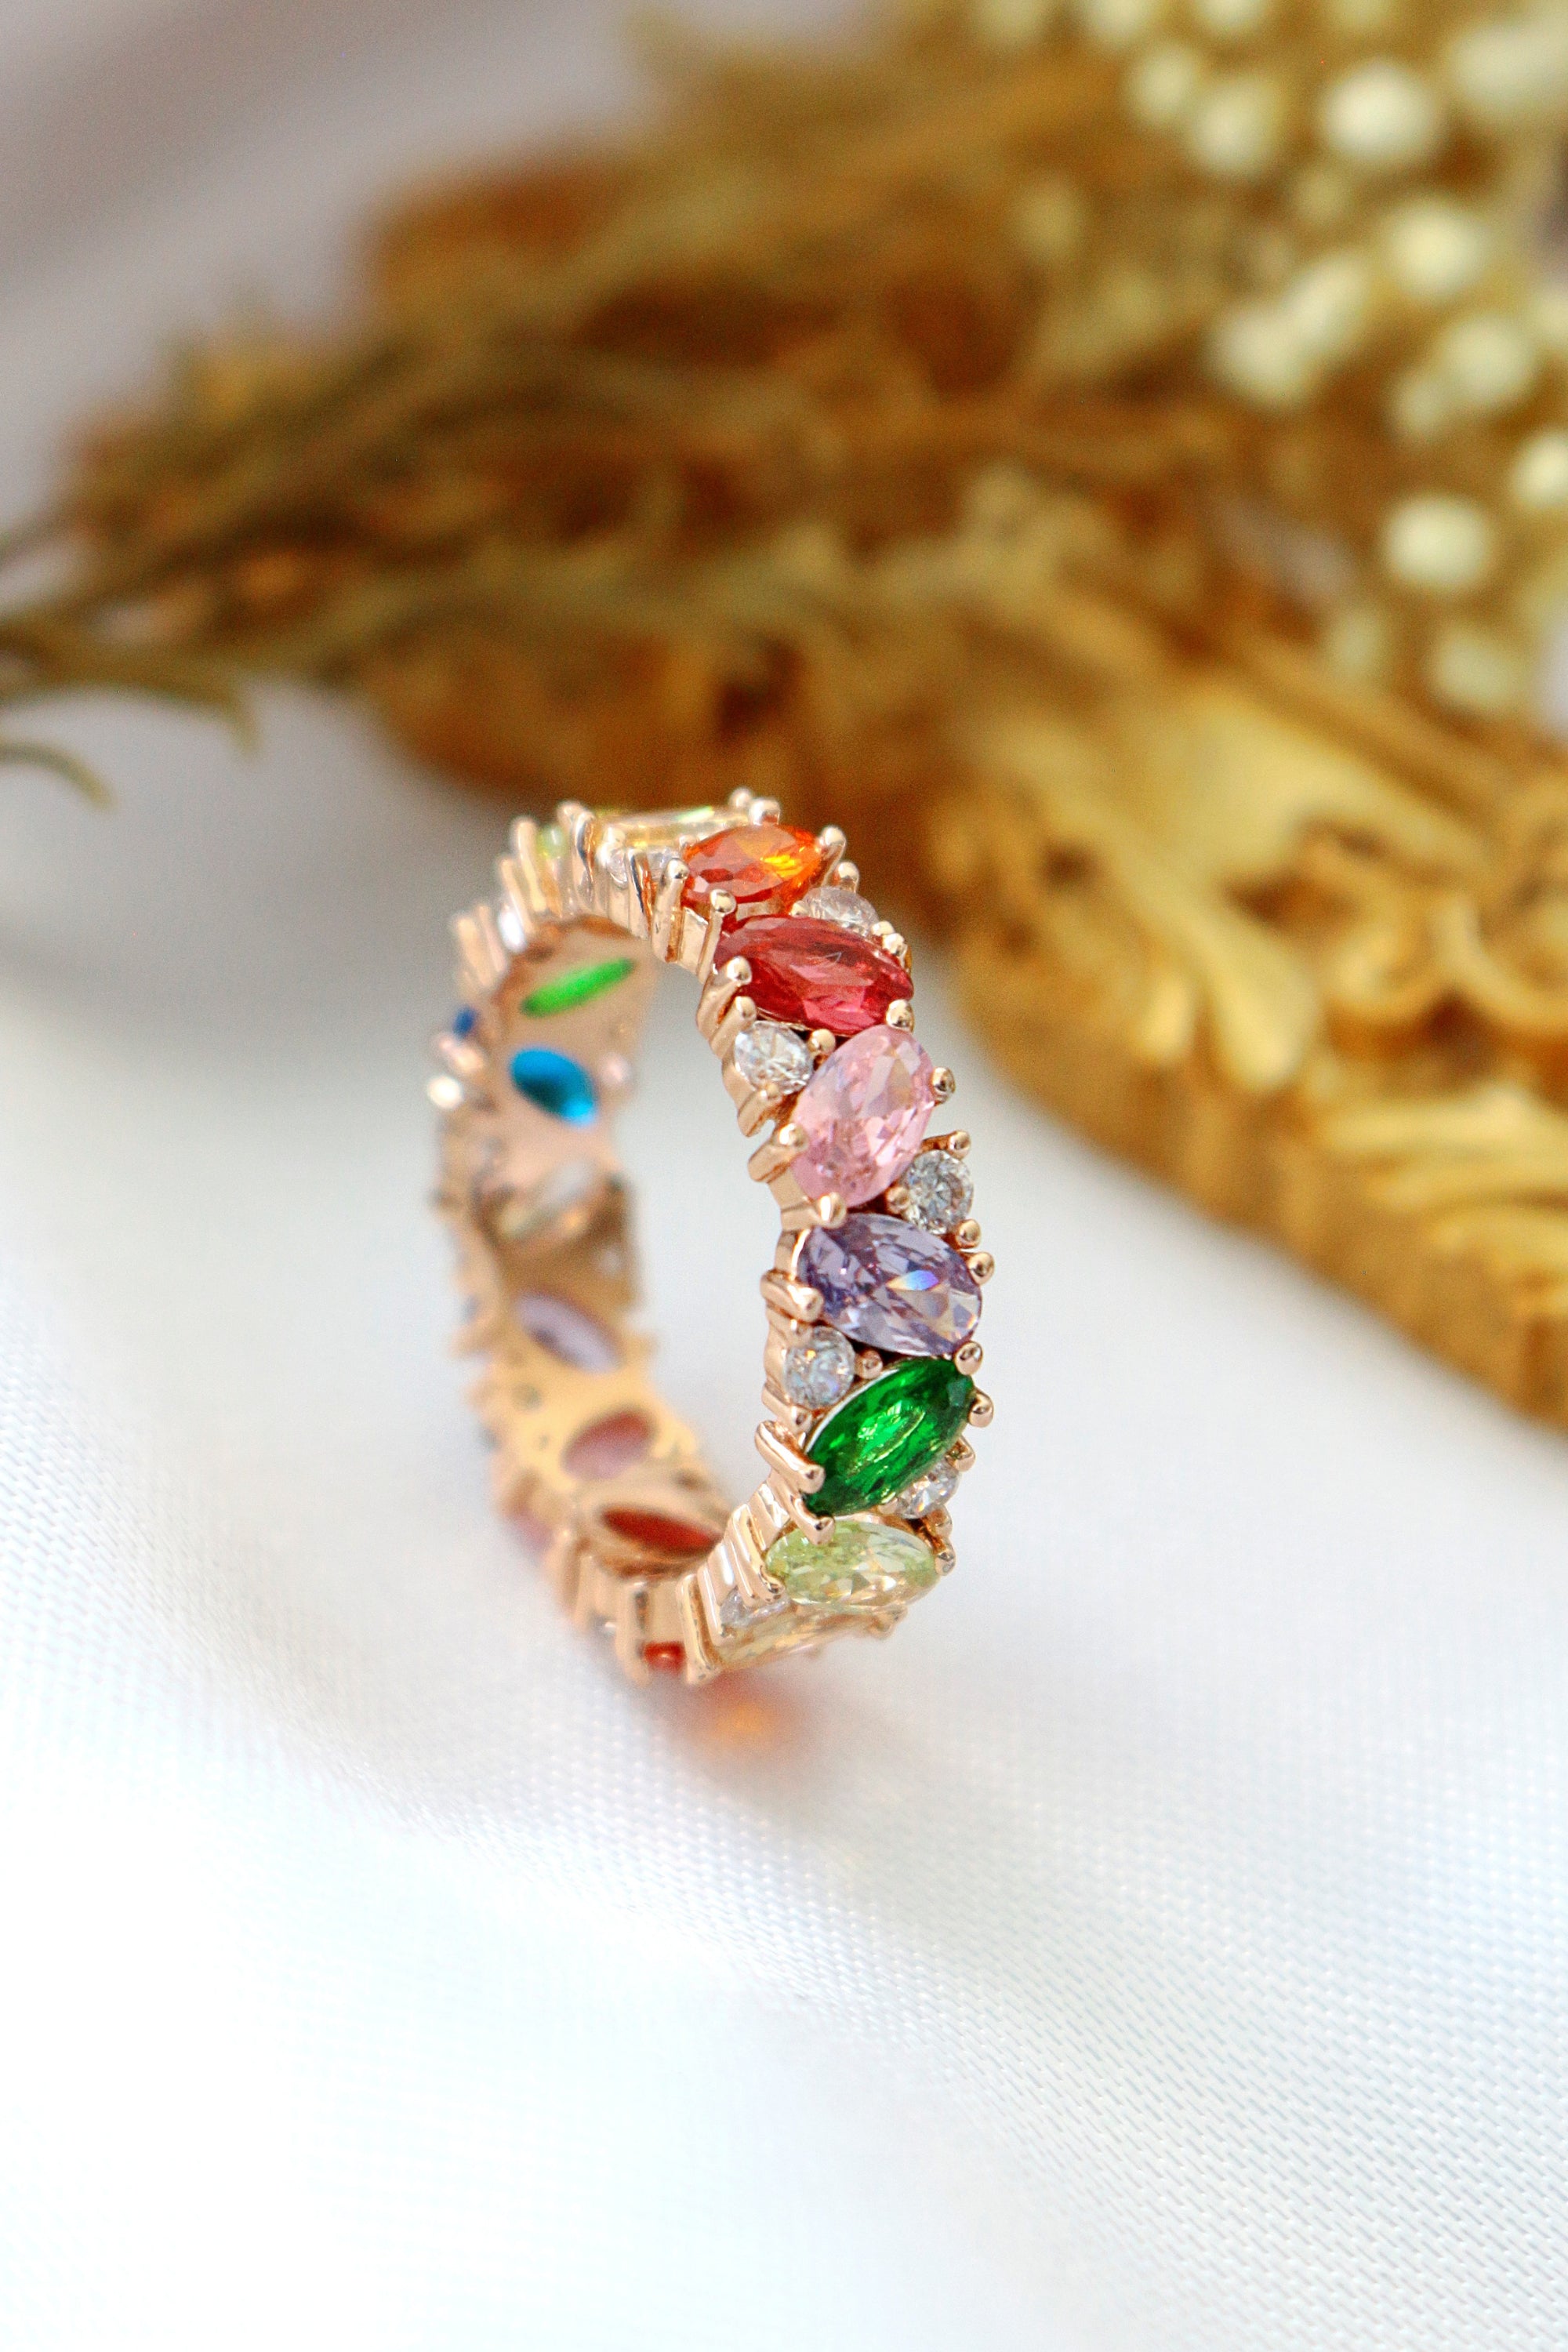 18K Rainbow Swarovski Eternity Band Ring - Handmade in Europe with High-Quality CZ Gems in Multicolor Hues Bijou Her